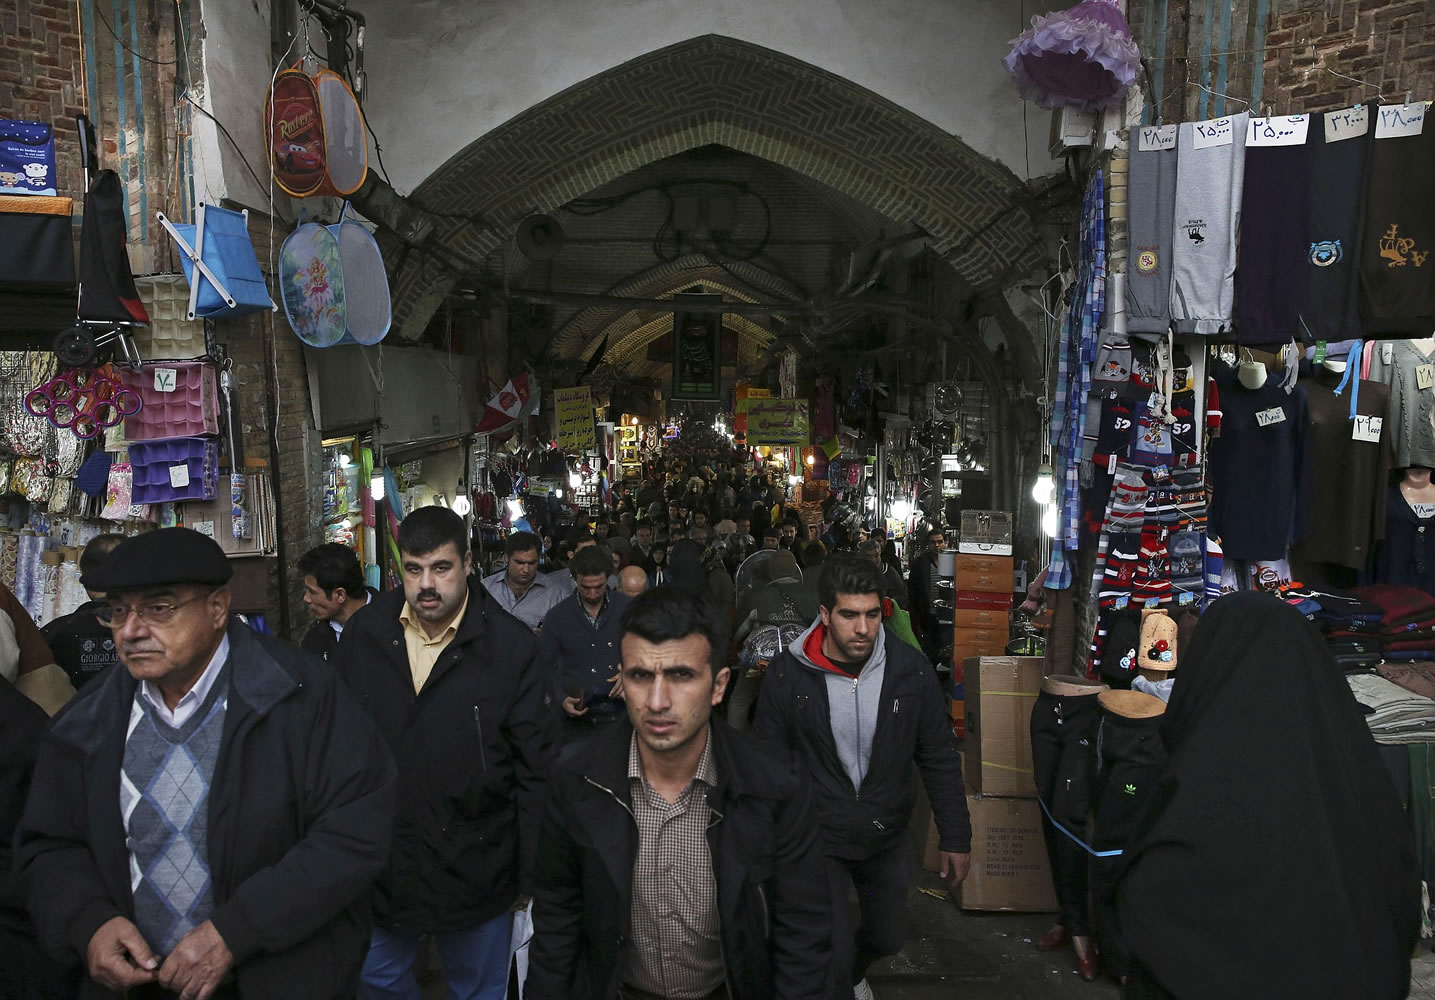 Iranians walk in Tehran's old main bazaar, Iran, Tuesday, Nov. 25, 2014. Iran's Supreme Leader said Tuesday that western powers will not be able to bring the country to its knees in nuclear talks, however he gave his indirect approval for a continuation of those negotiations.